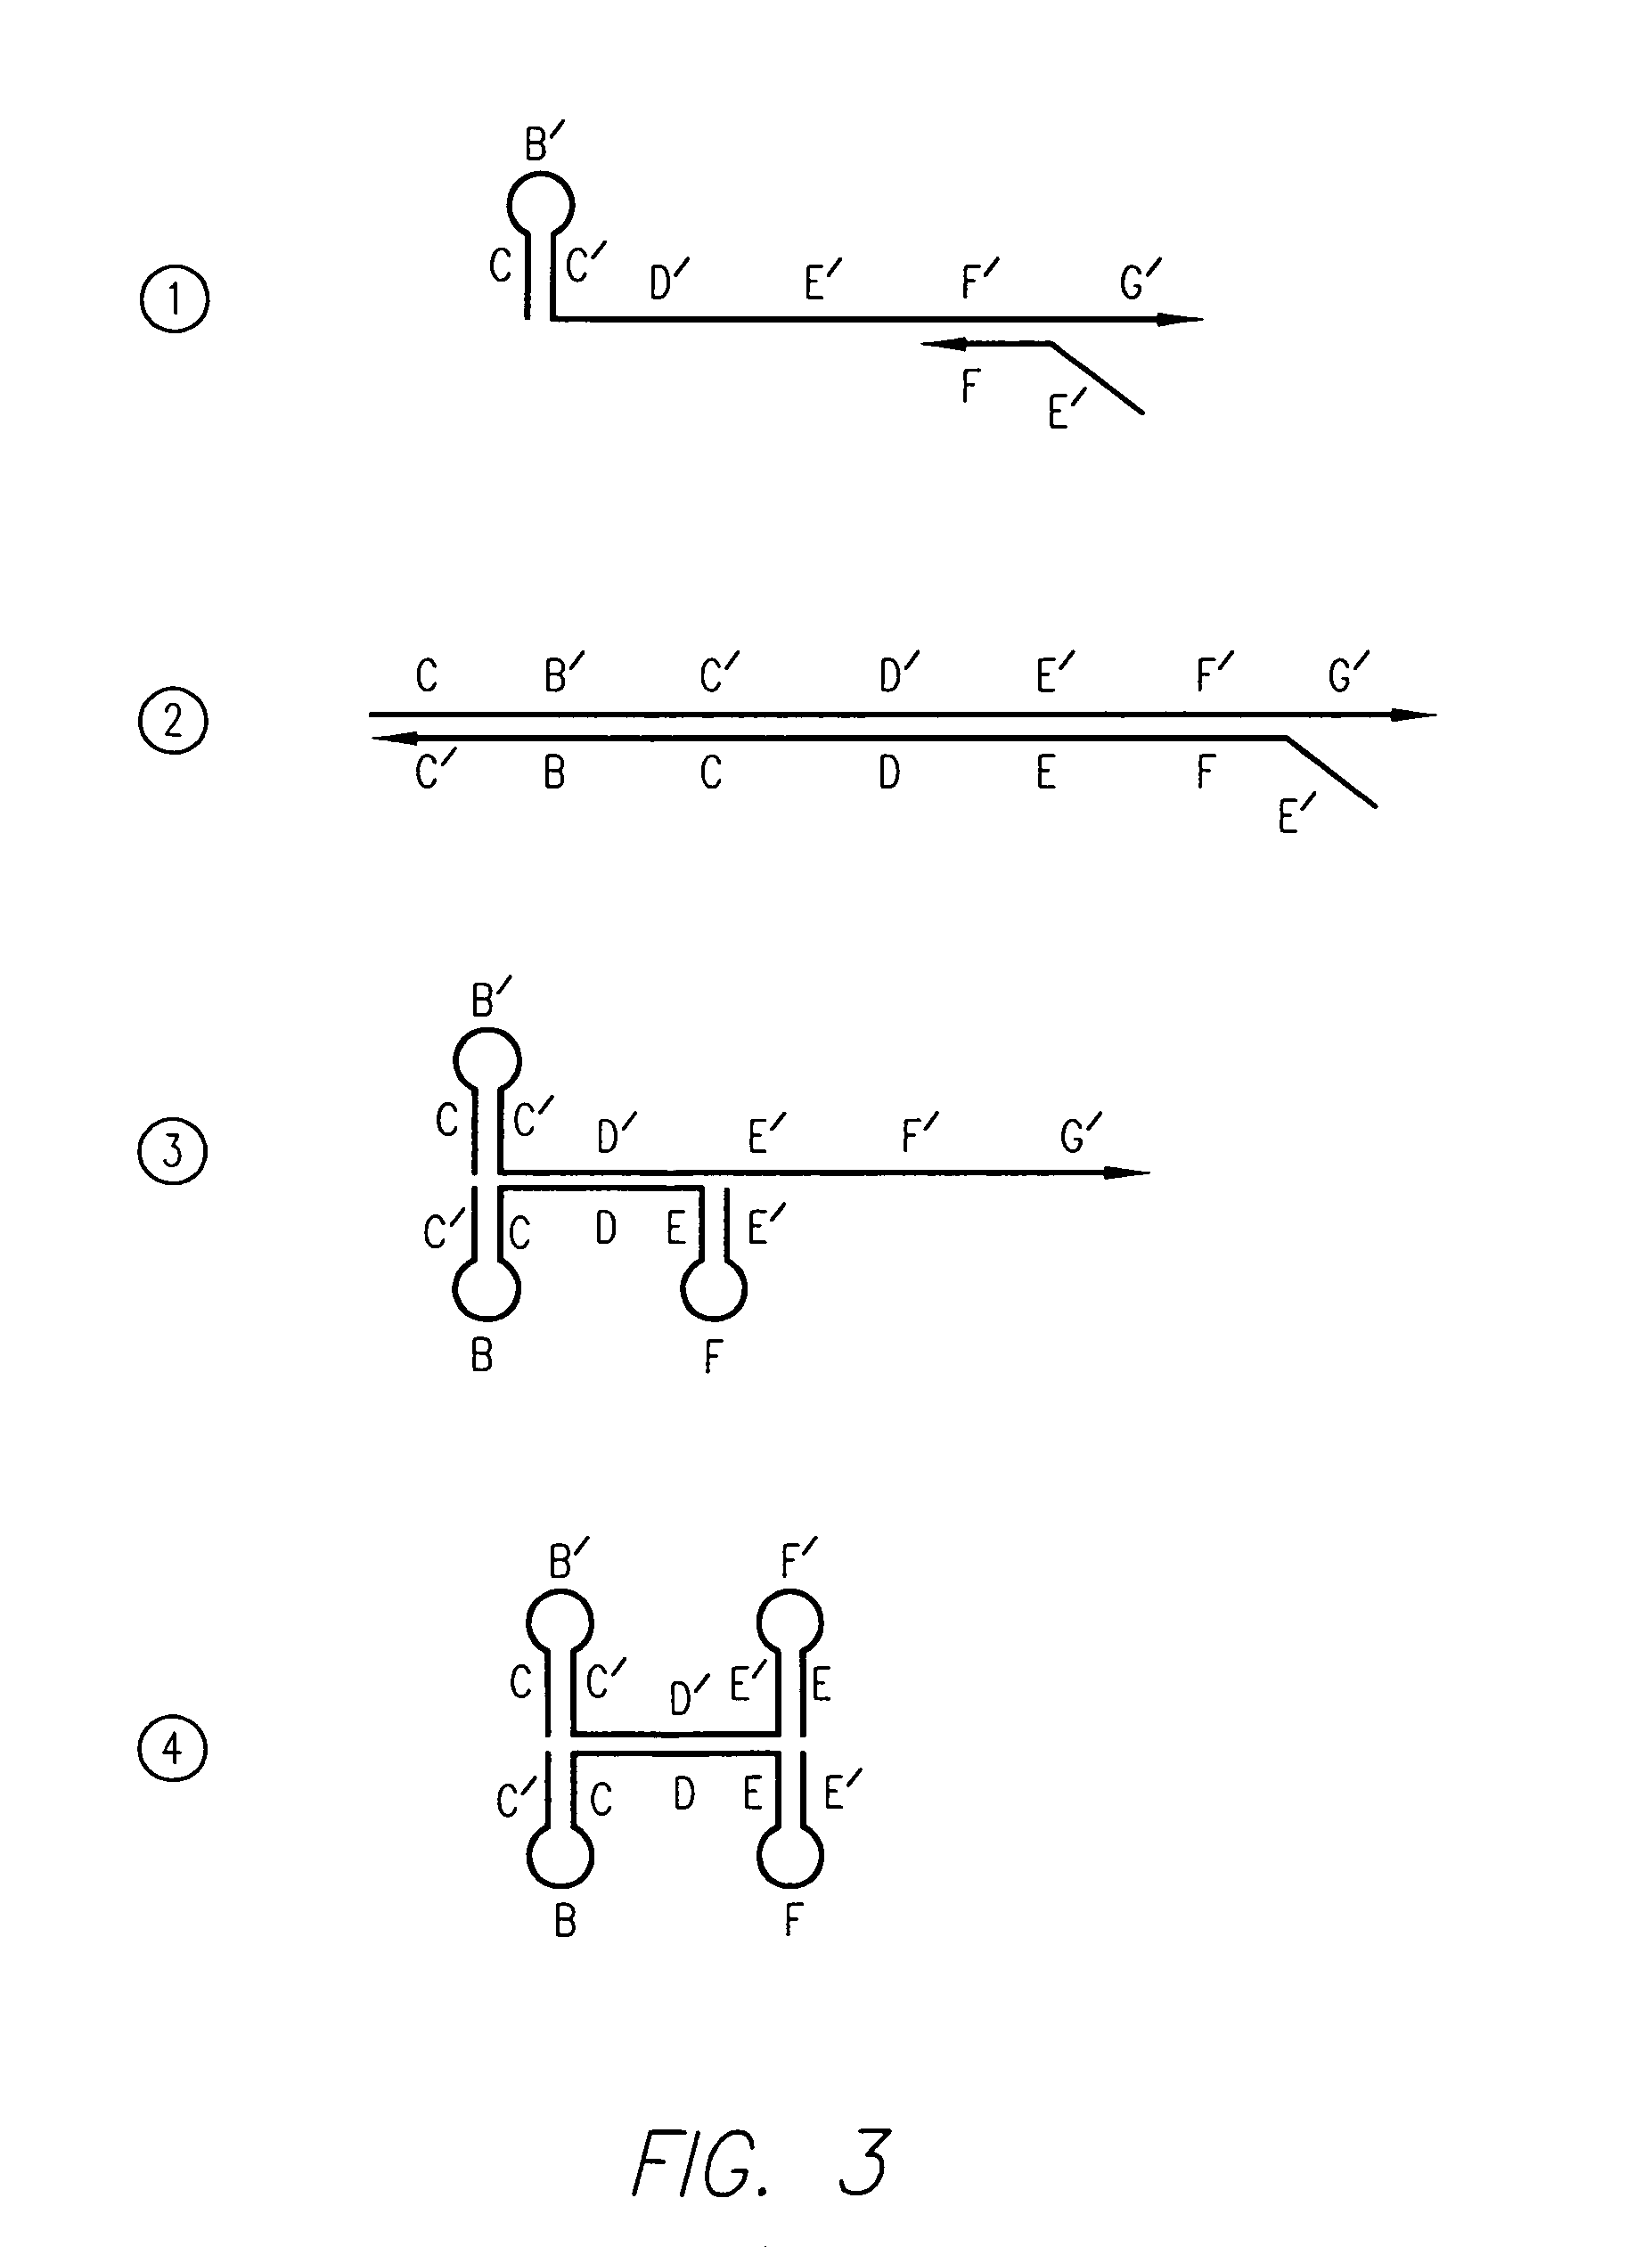 Kits for amplifying and detecting nucleic acid sequences